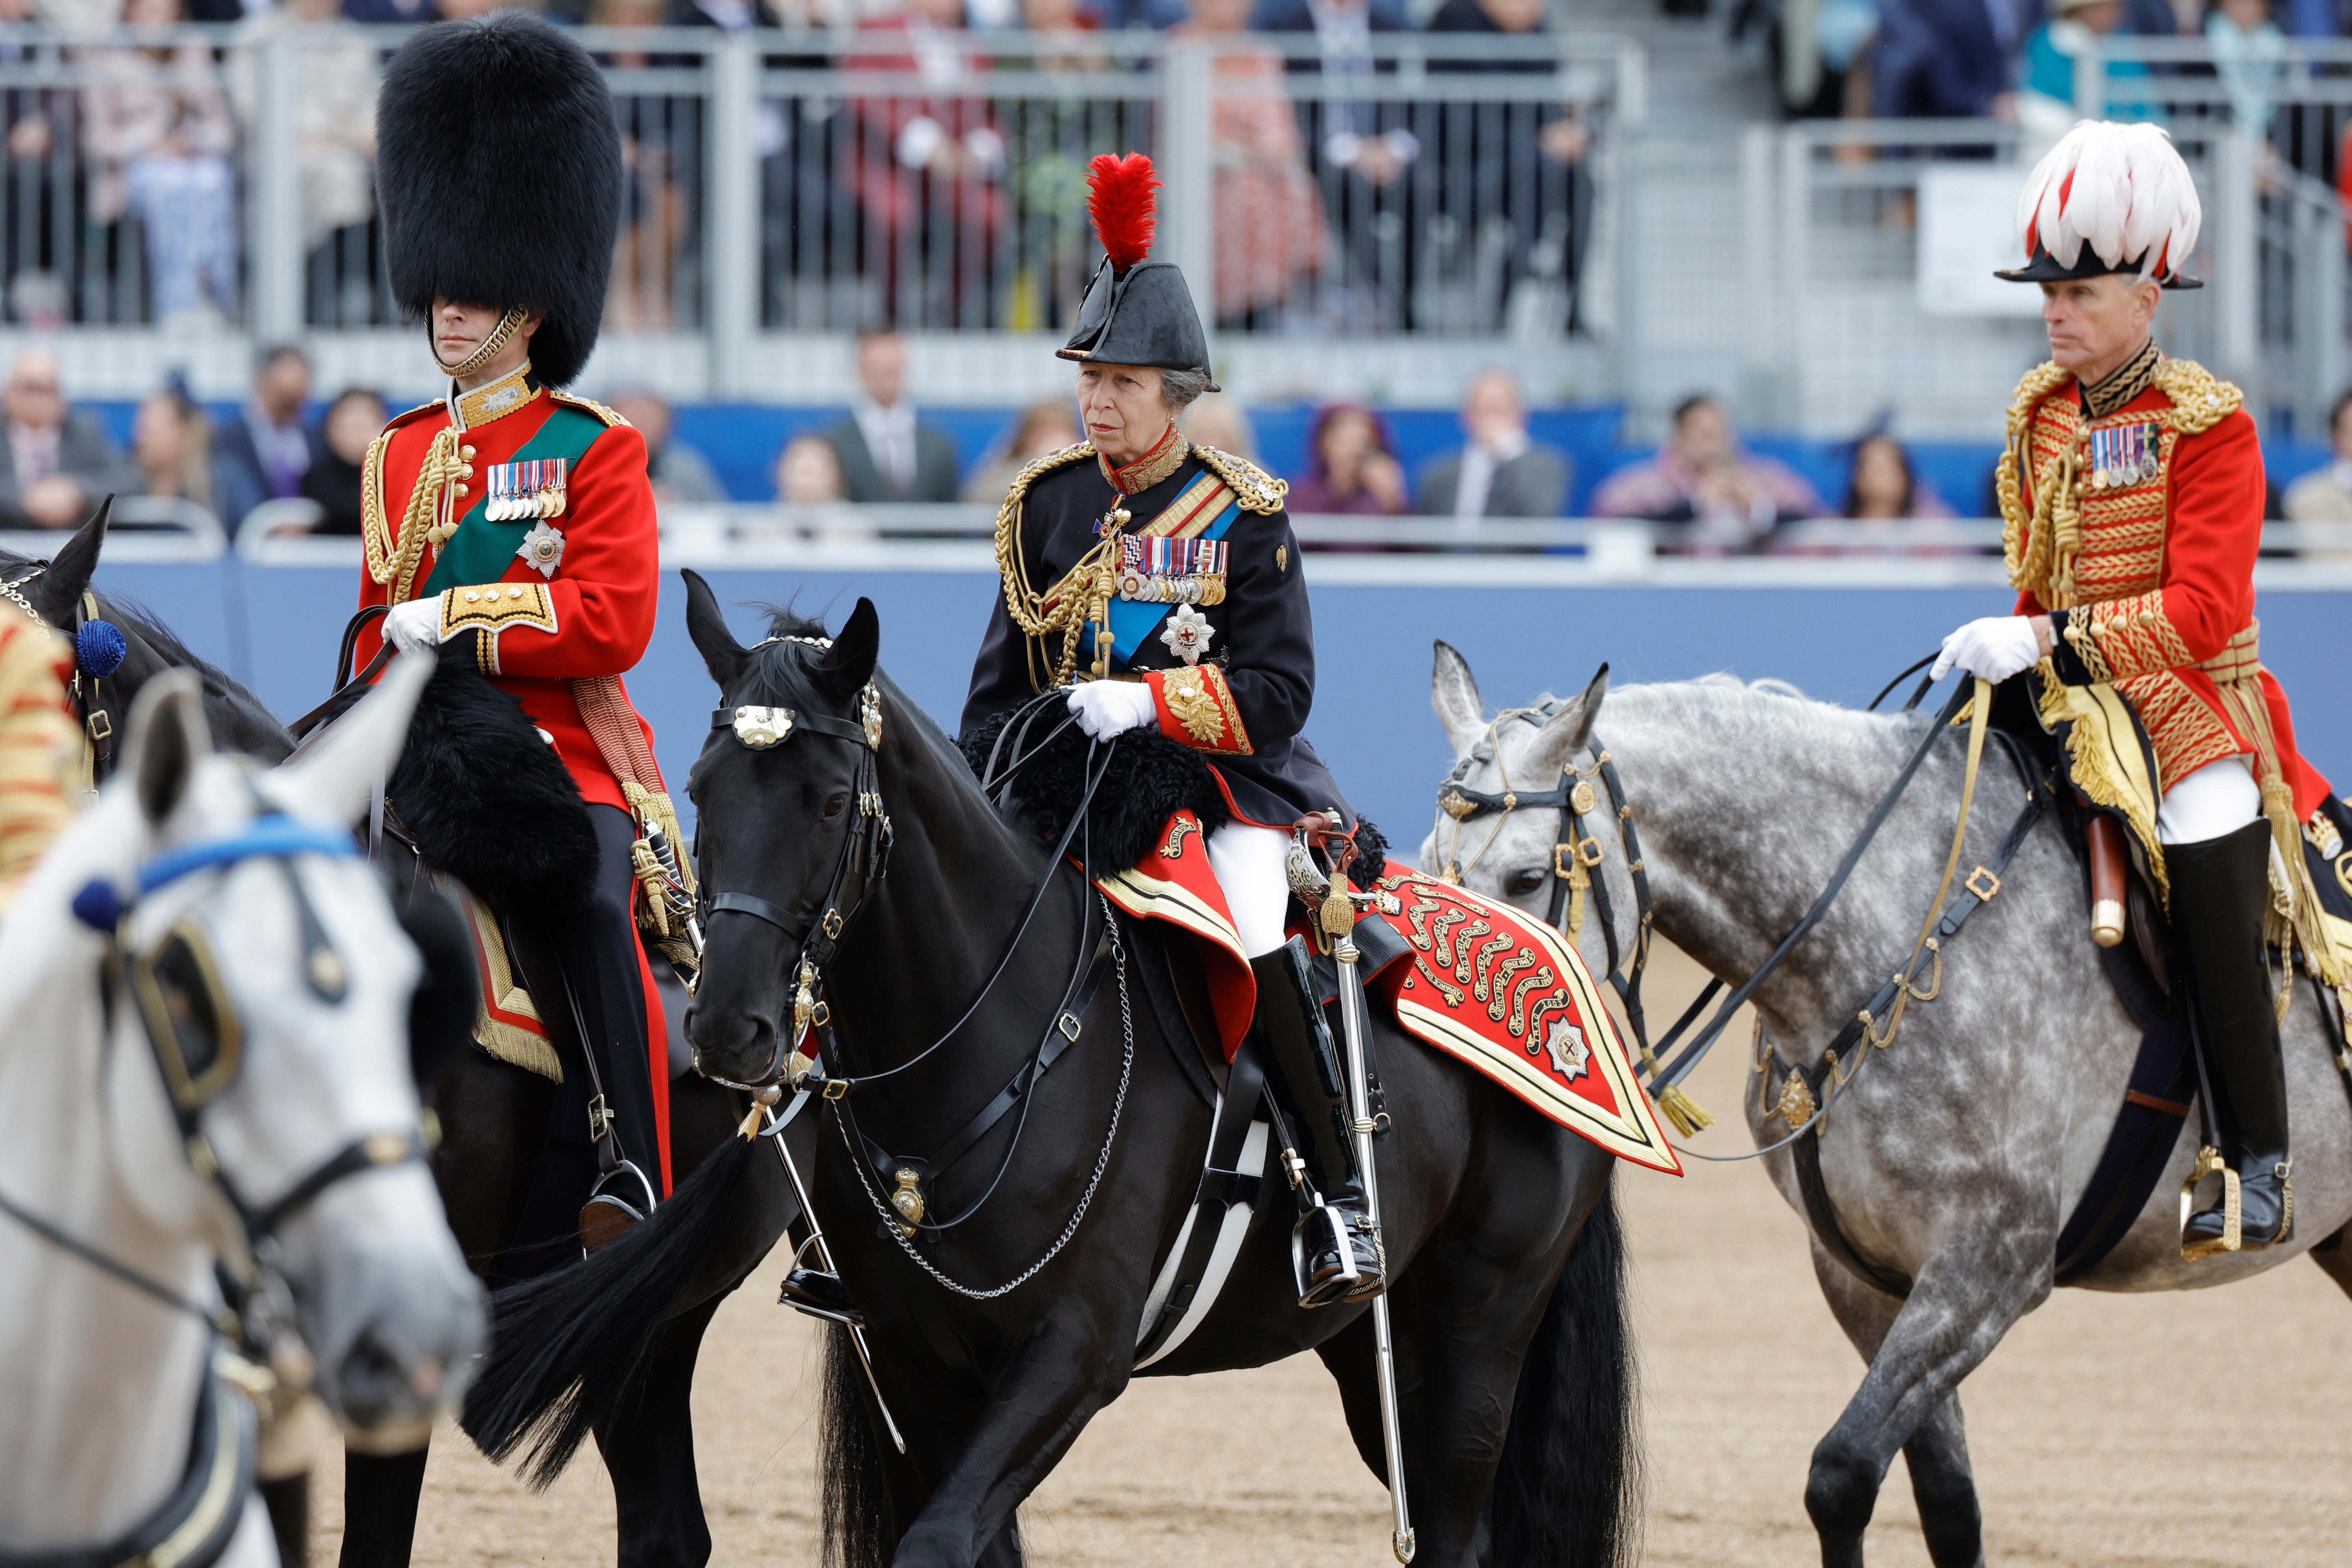 Princess Anne was hospitalised after a speculated kick from a horse.